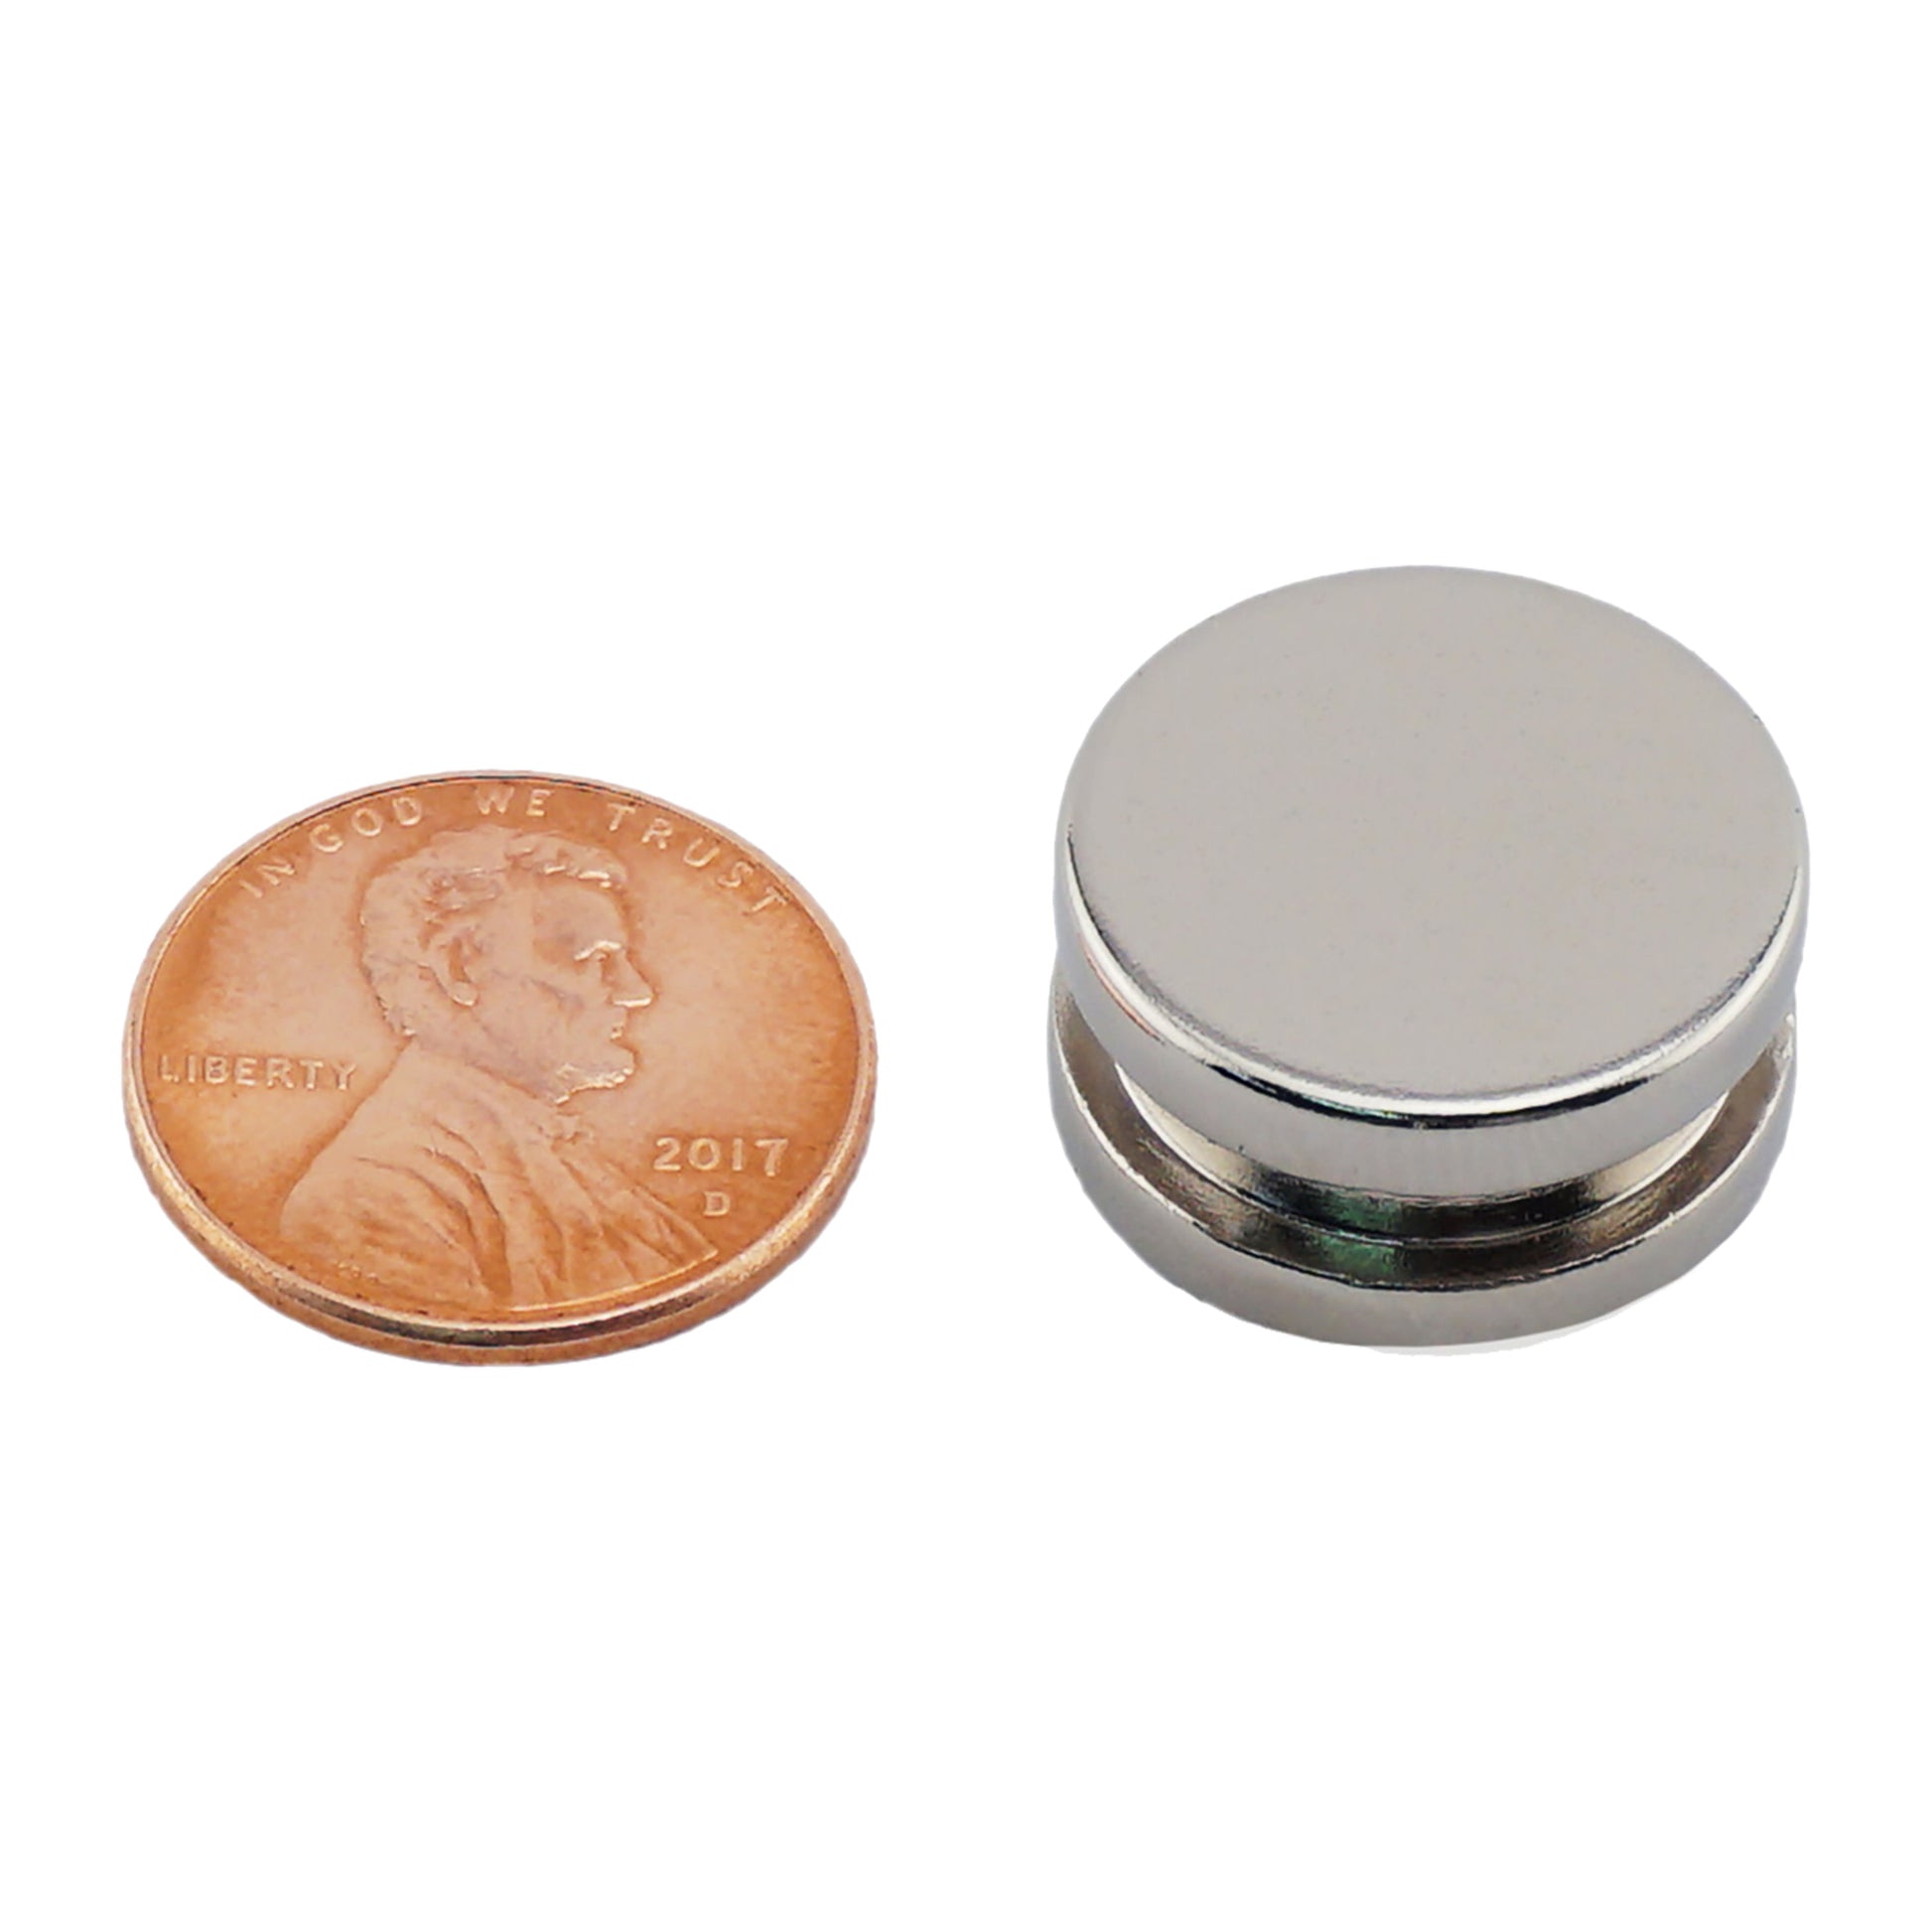 Load image into Gallery viewer, NDGI003700N Neodymium Disc Magnet - Compared to Penny for Size Reference